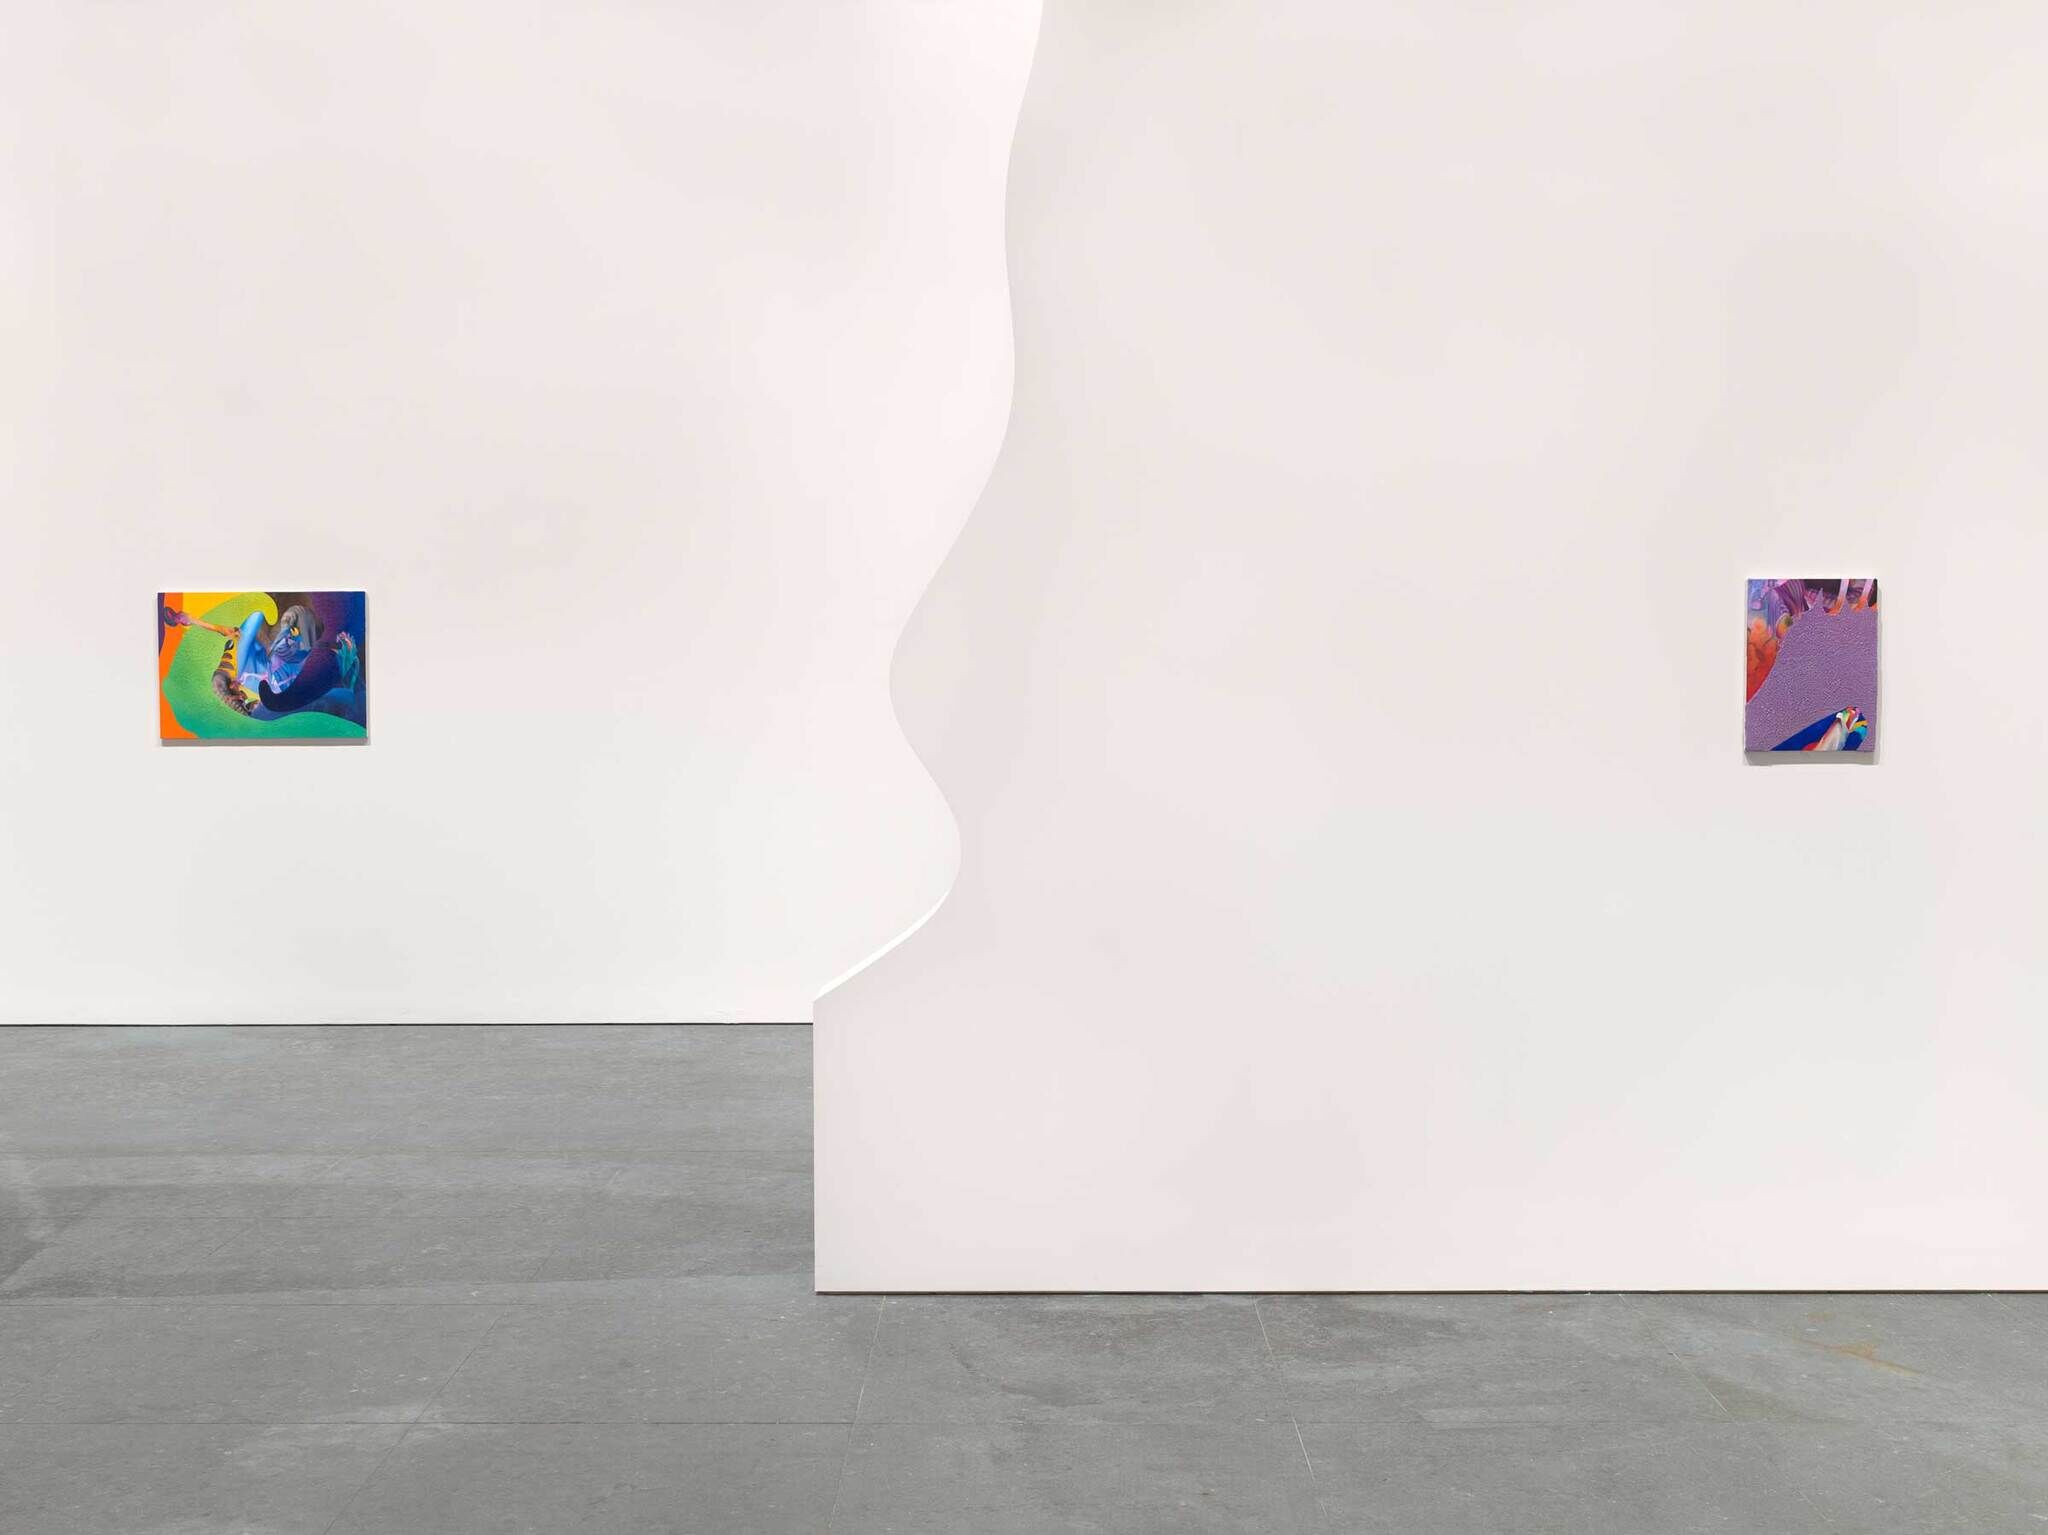 Two smaller vivid abstract paintings on different walls. The wall in the foreground has an abstract squiggle edge.